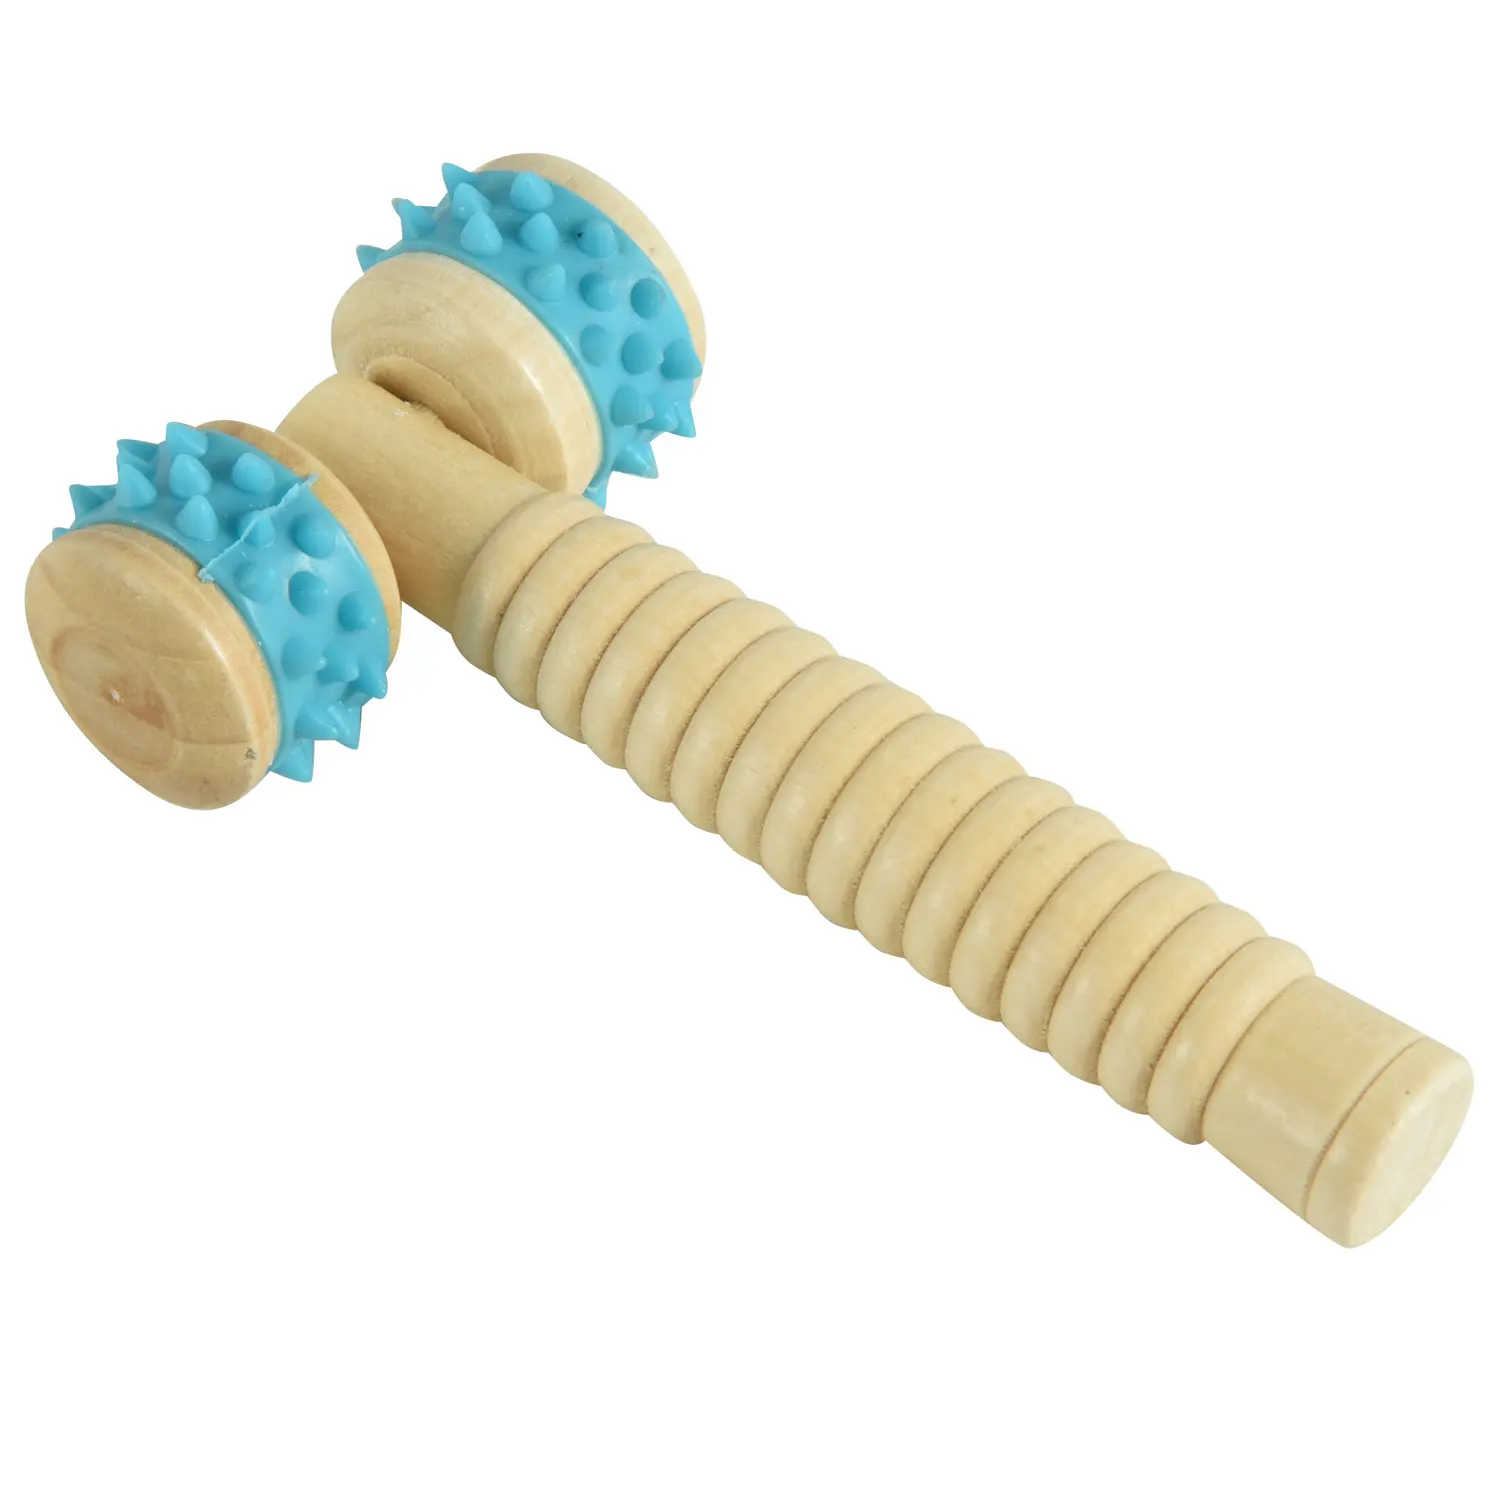 Two Wheel Portable Wooden handheld Roller Massager Therapy Massage Tools Perfect Self Massager For Body Neck Shoulder Arms Legs